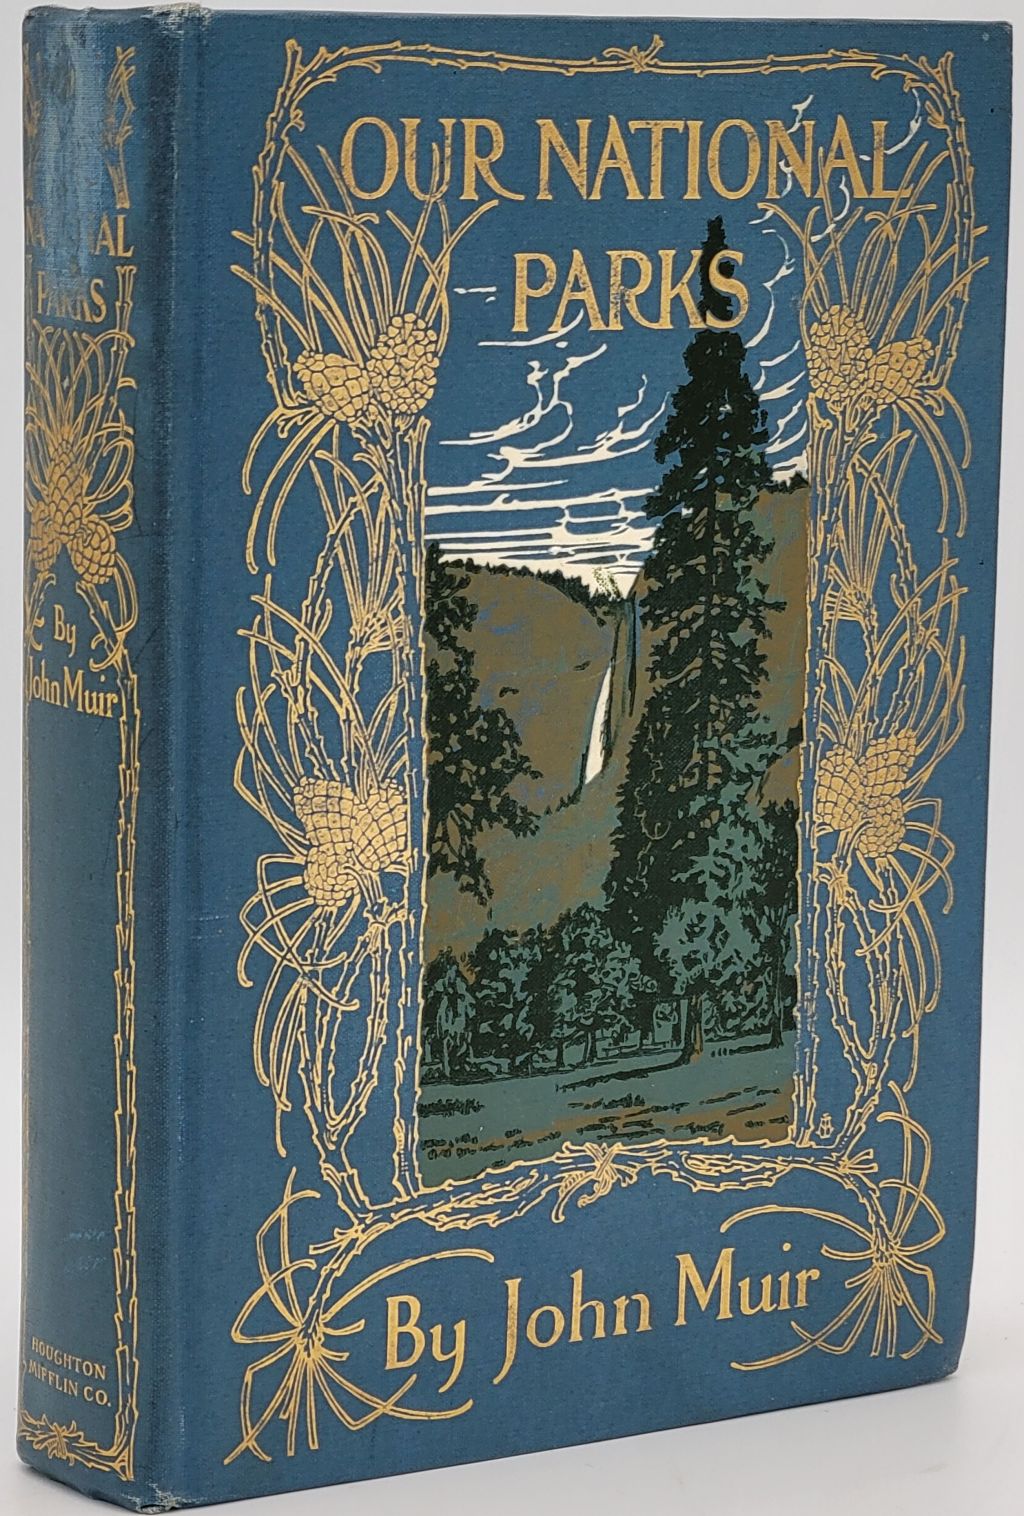 Muir's 1901 book Our National Parks became a national bestseller.